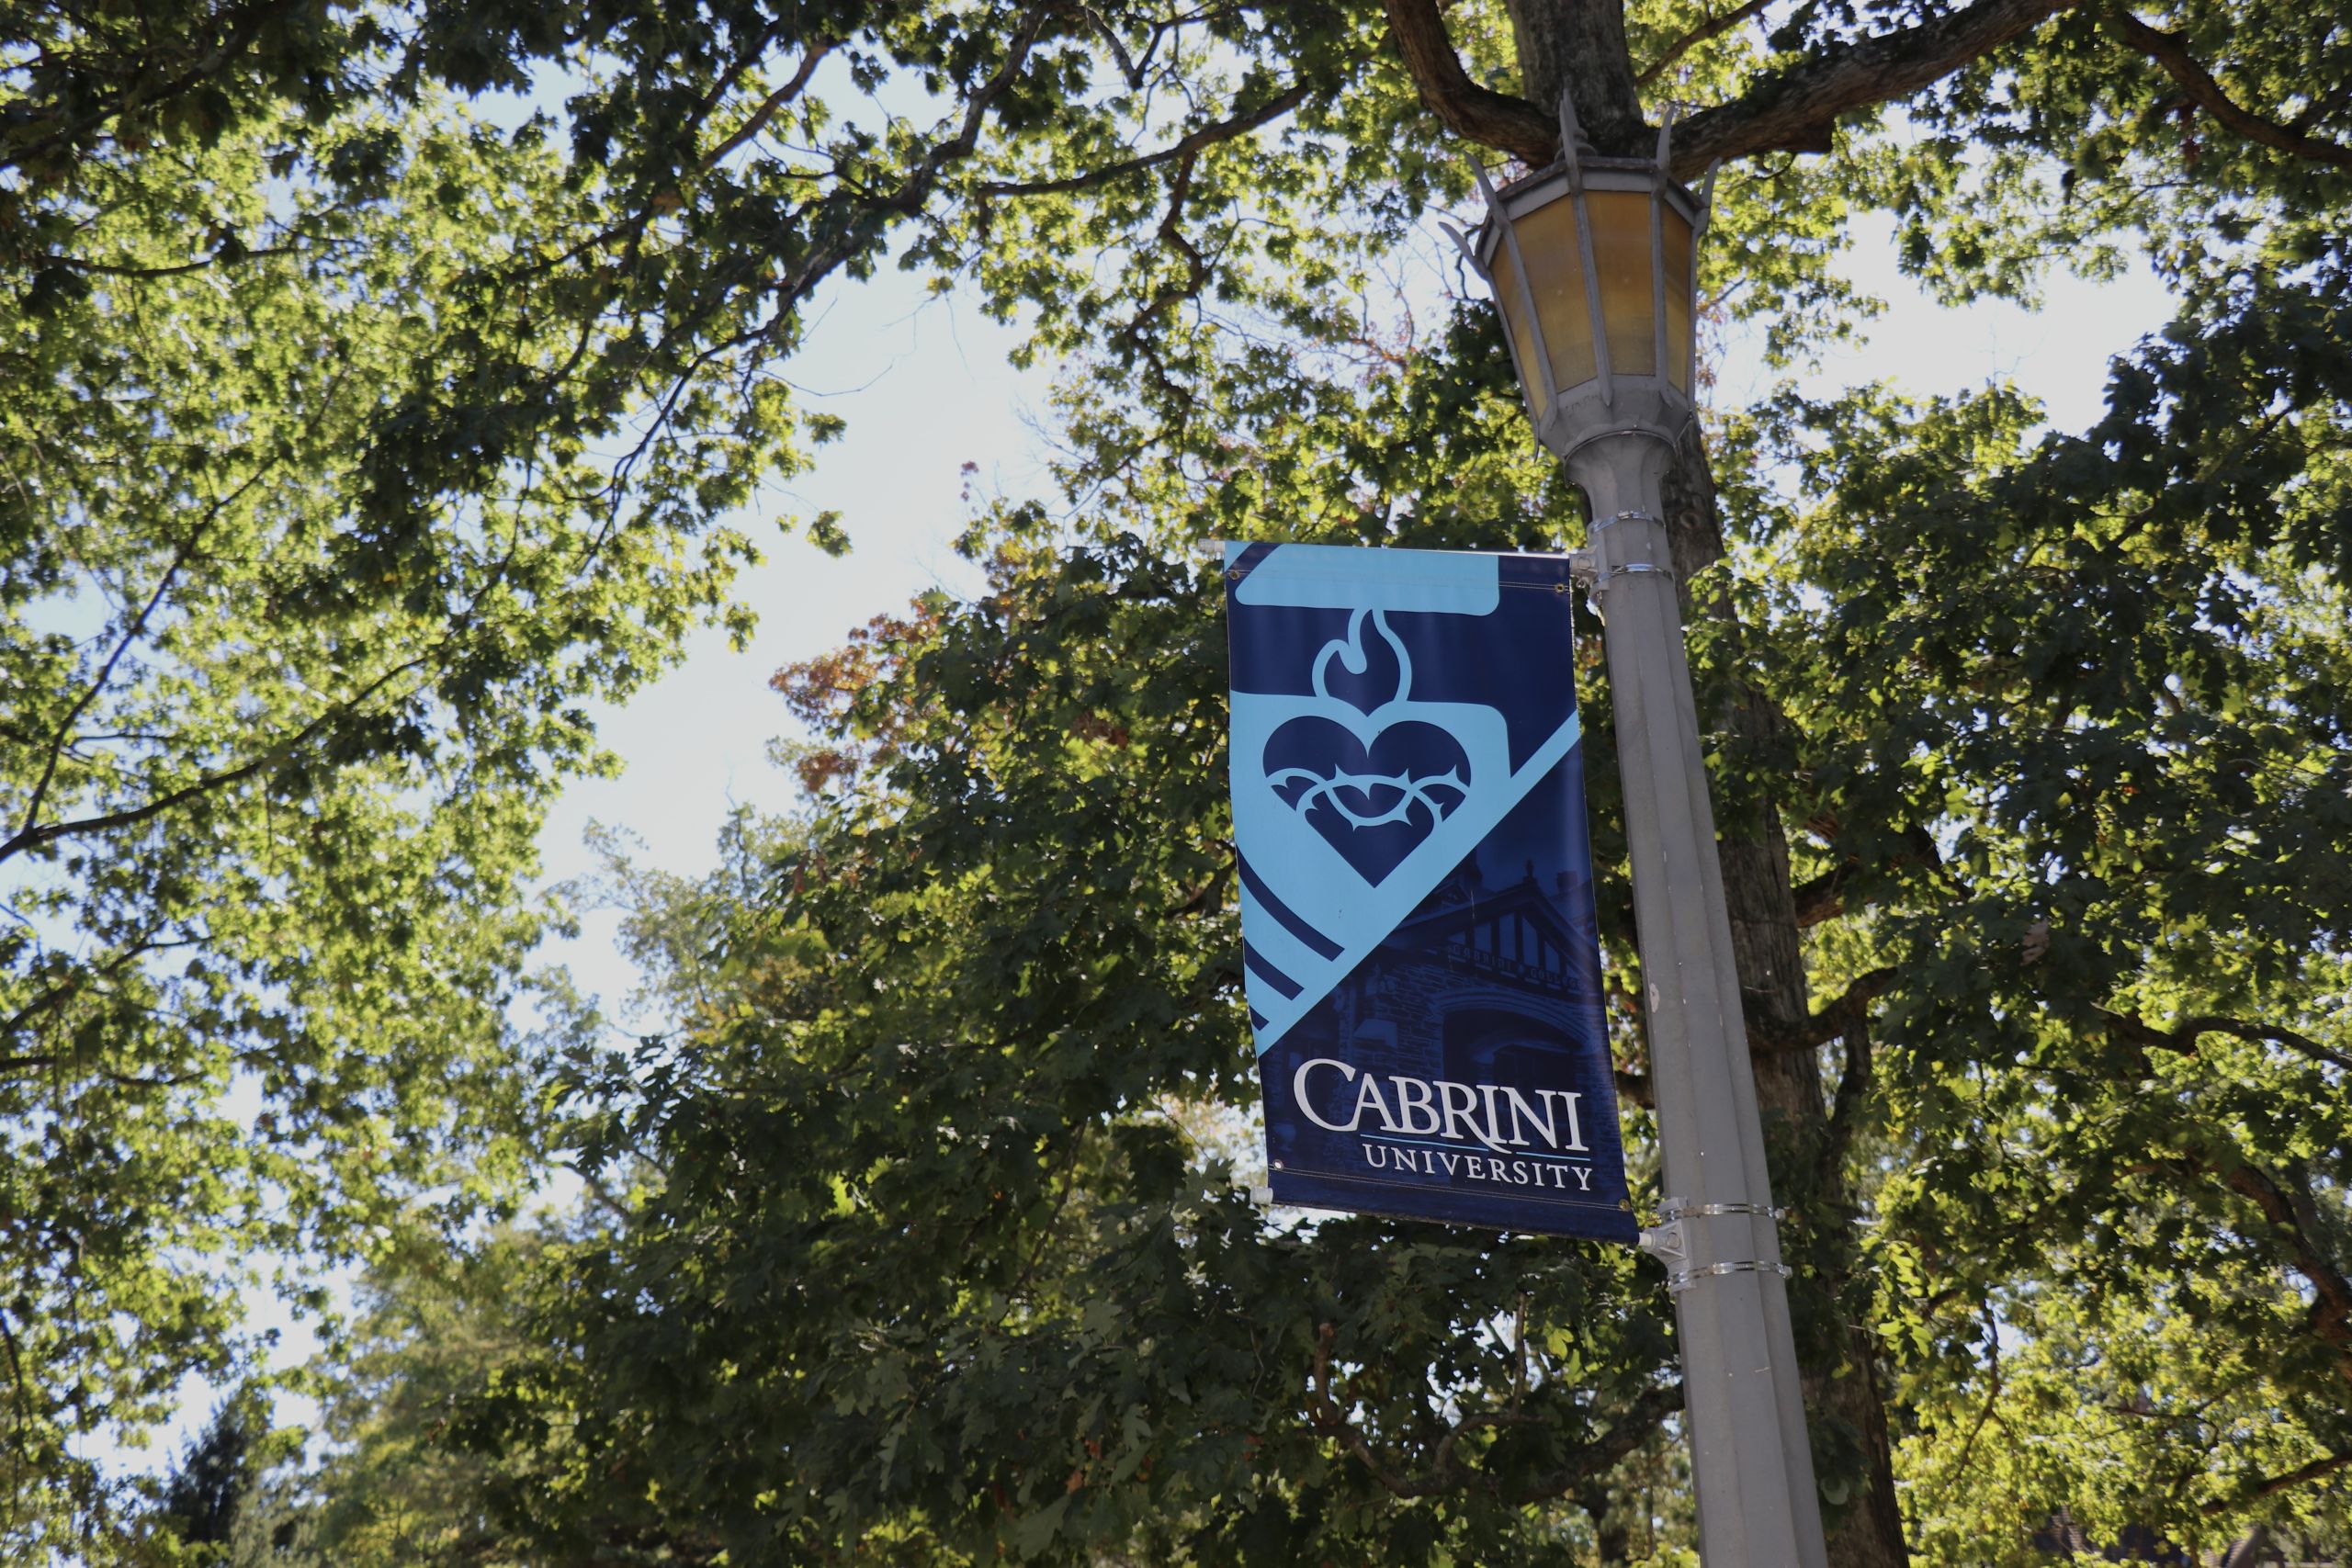 Cabrini University and a symbol of their mission: "education of the heart."
Photo by Erica Zebrowski. 